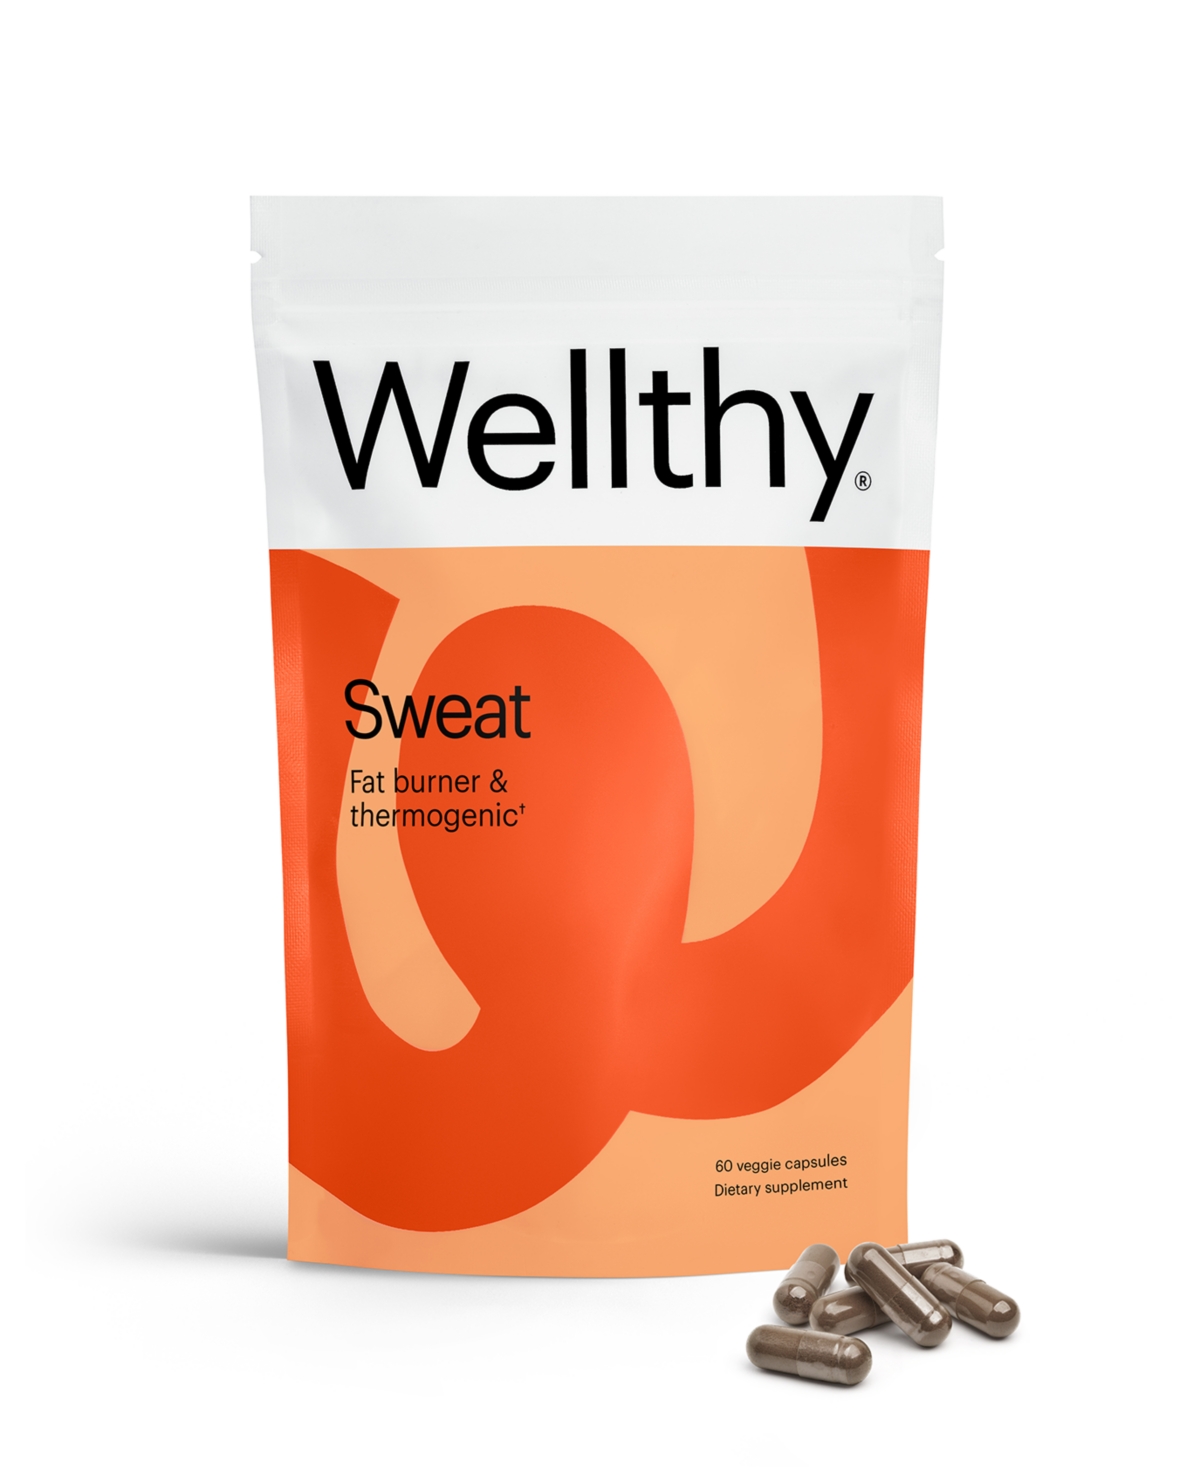 Sweat Herbal Supplement by Wellthy Capsule - 60 Count